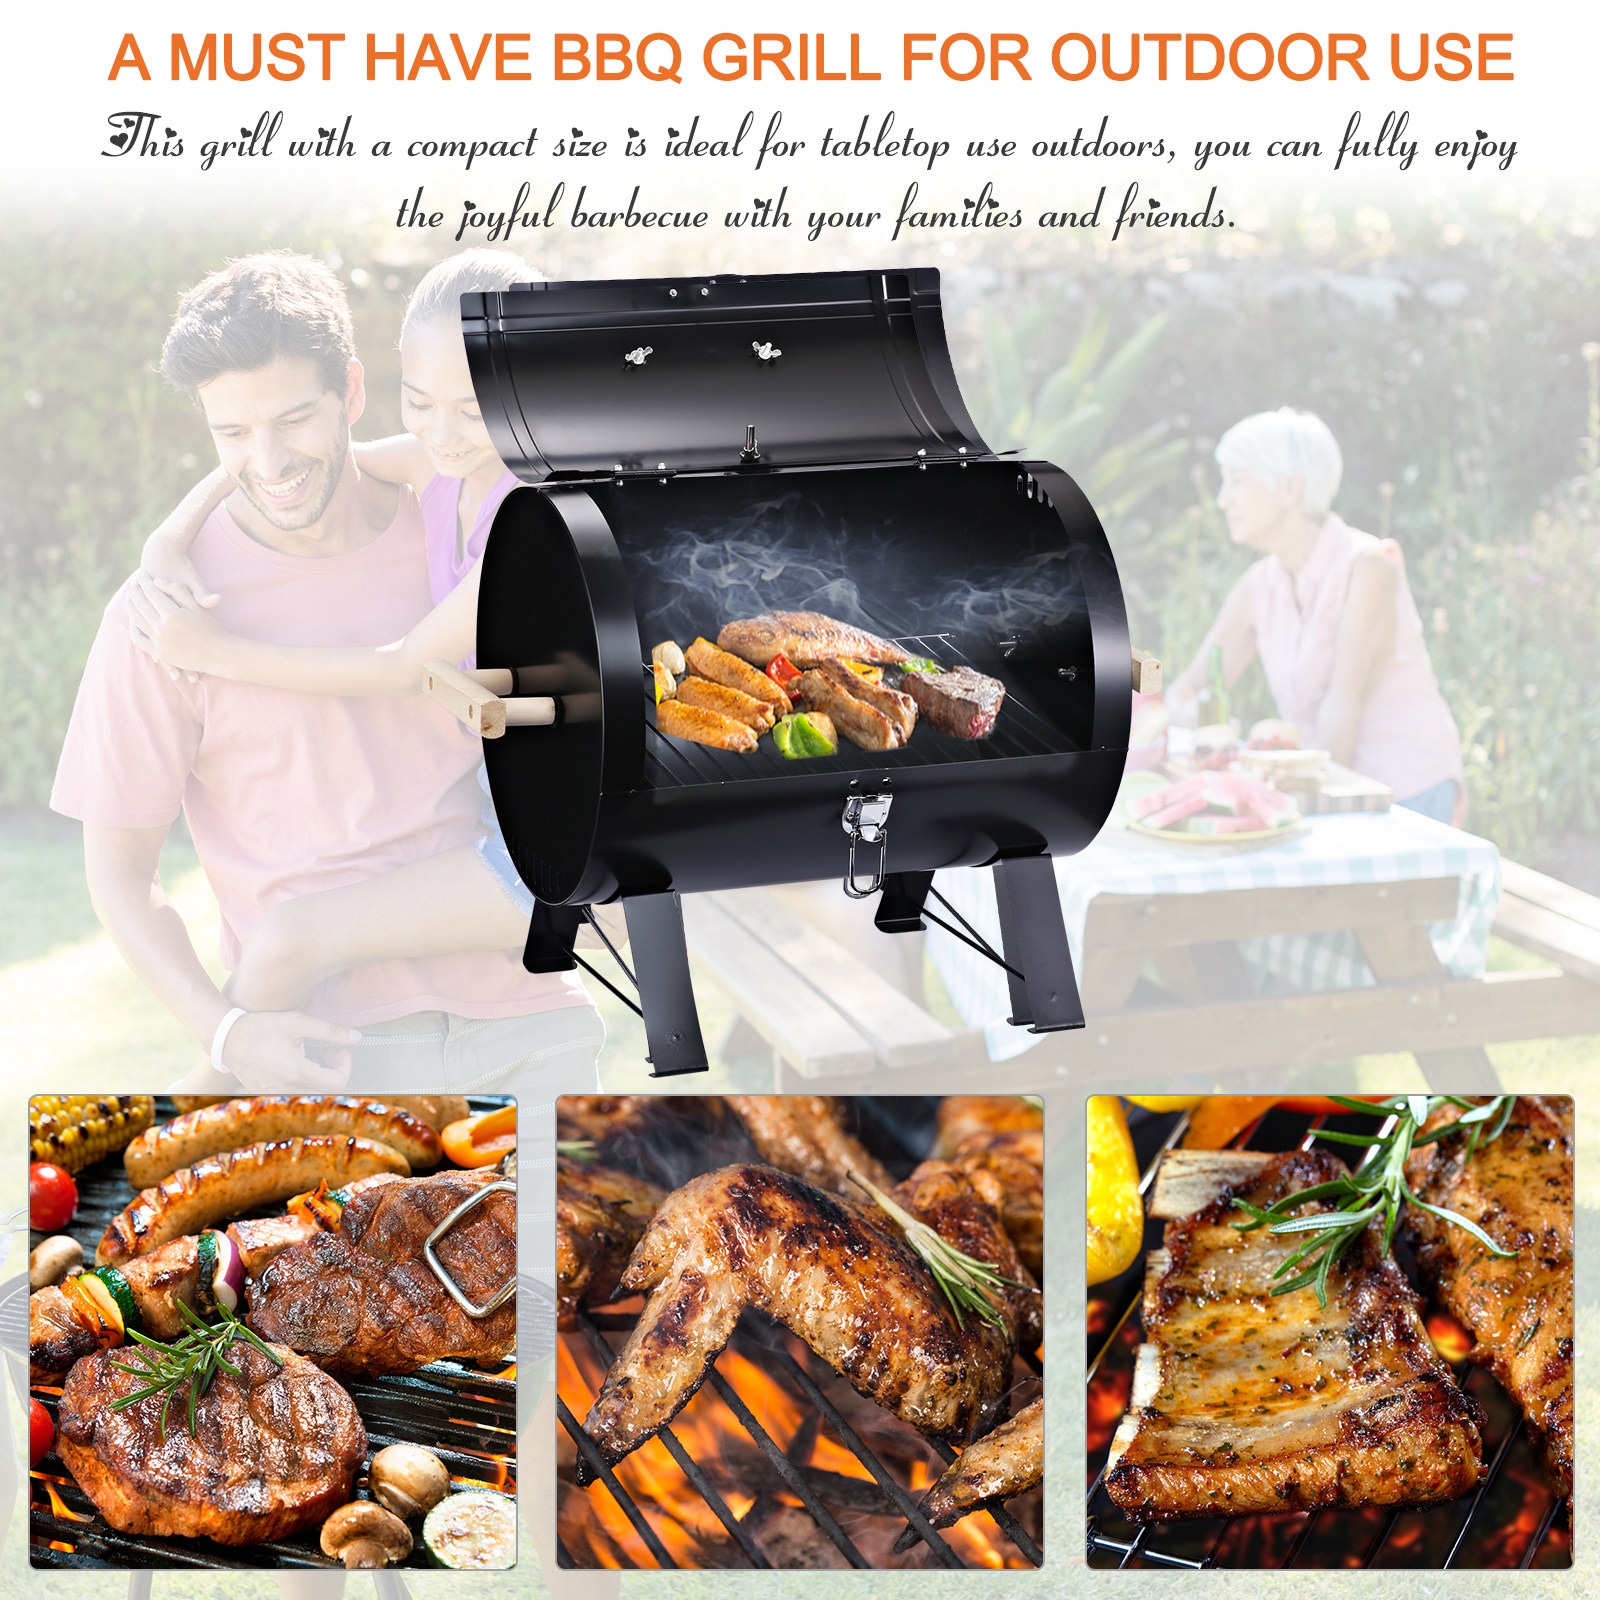 VEVOR 23 inch Portable Charcoal Grill, Flat Top Propane GAS Grills, Compact Foldable Grill, Heavy Duty Steel BBQ Grill, Mini S